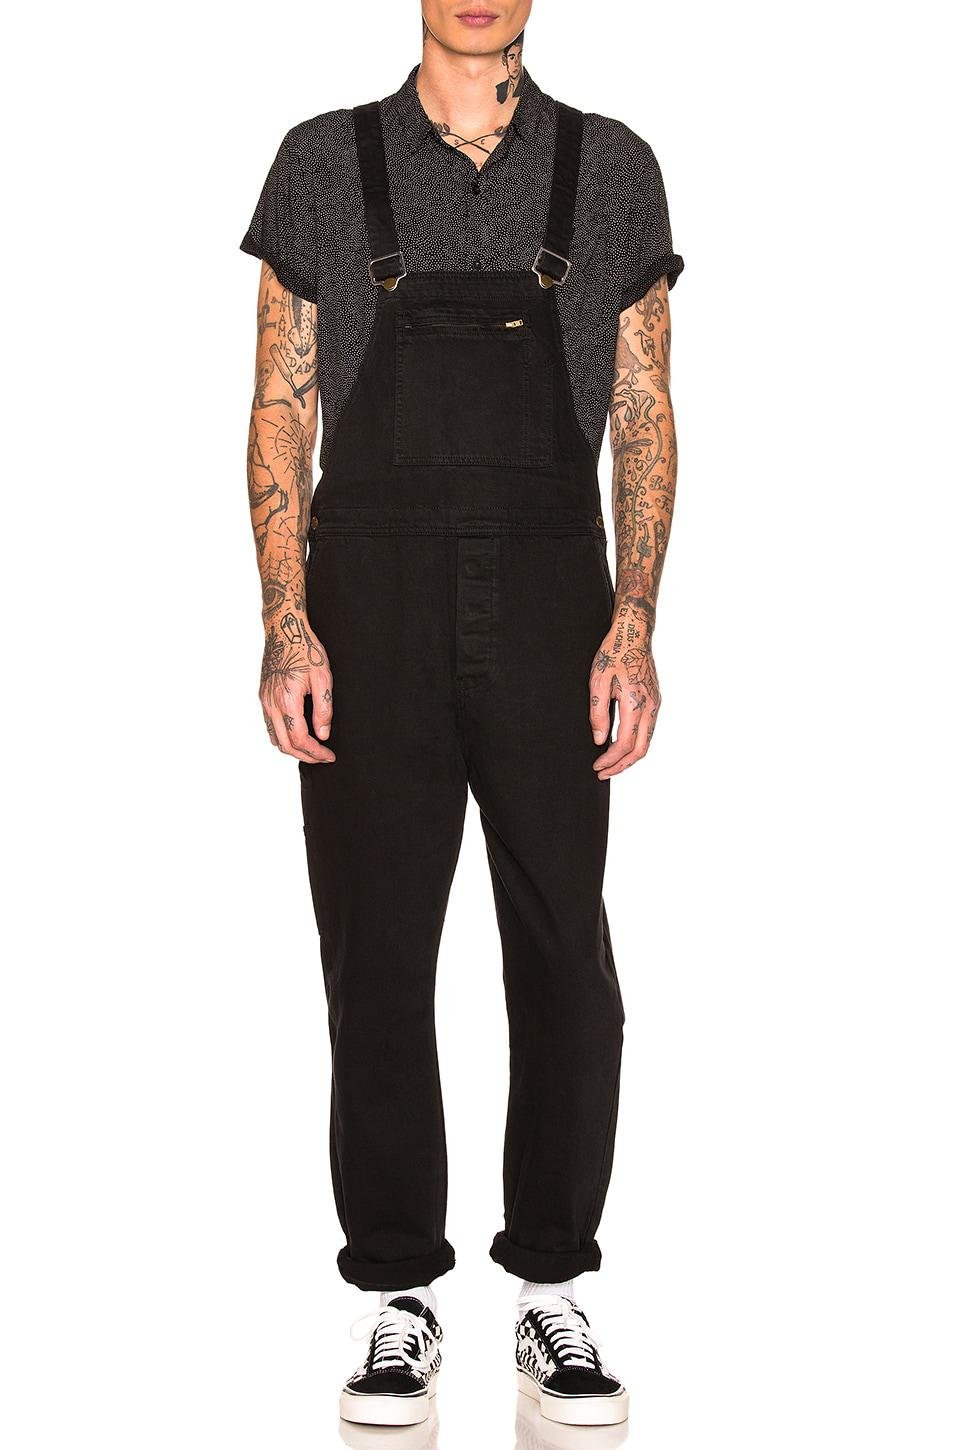 ROLLA'S Trade Overalls in Black by ROLLA'S